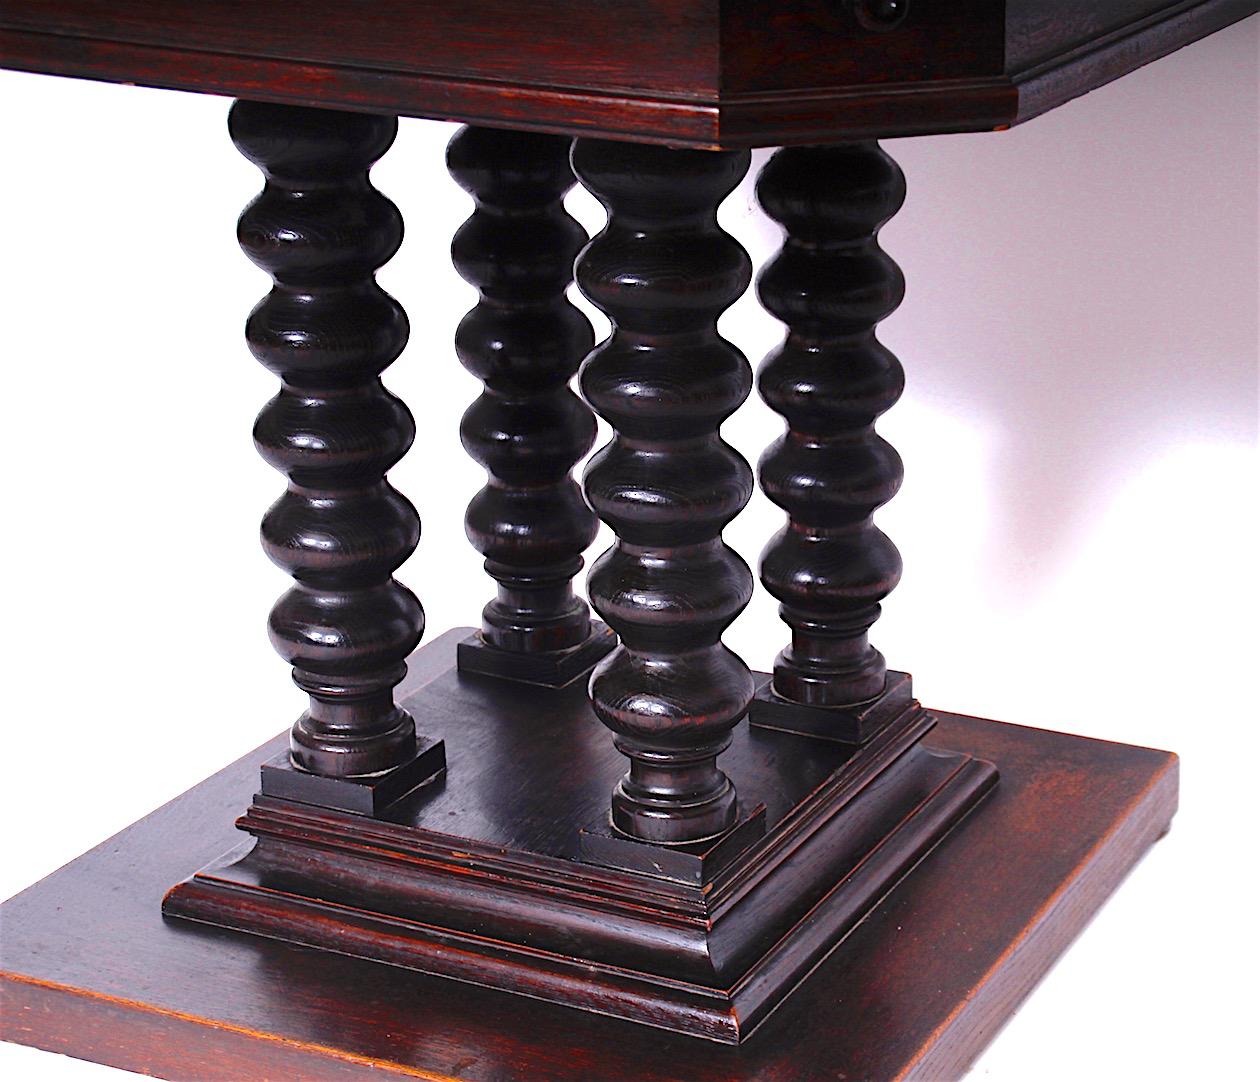 The card table from the period of historicism is in a nice original condition. The upper plate is covered with leather, drawers on each corner, beautiful carved base.